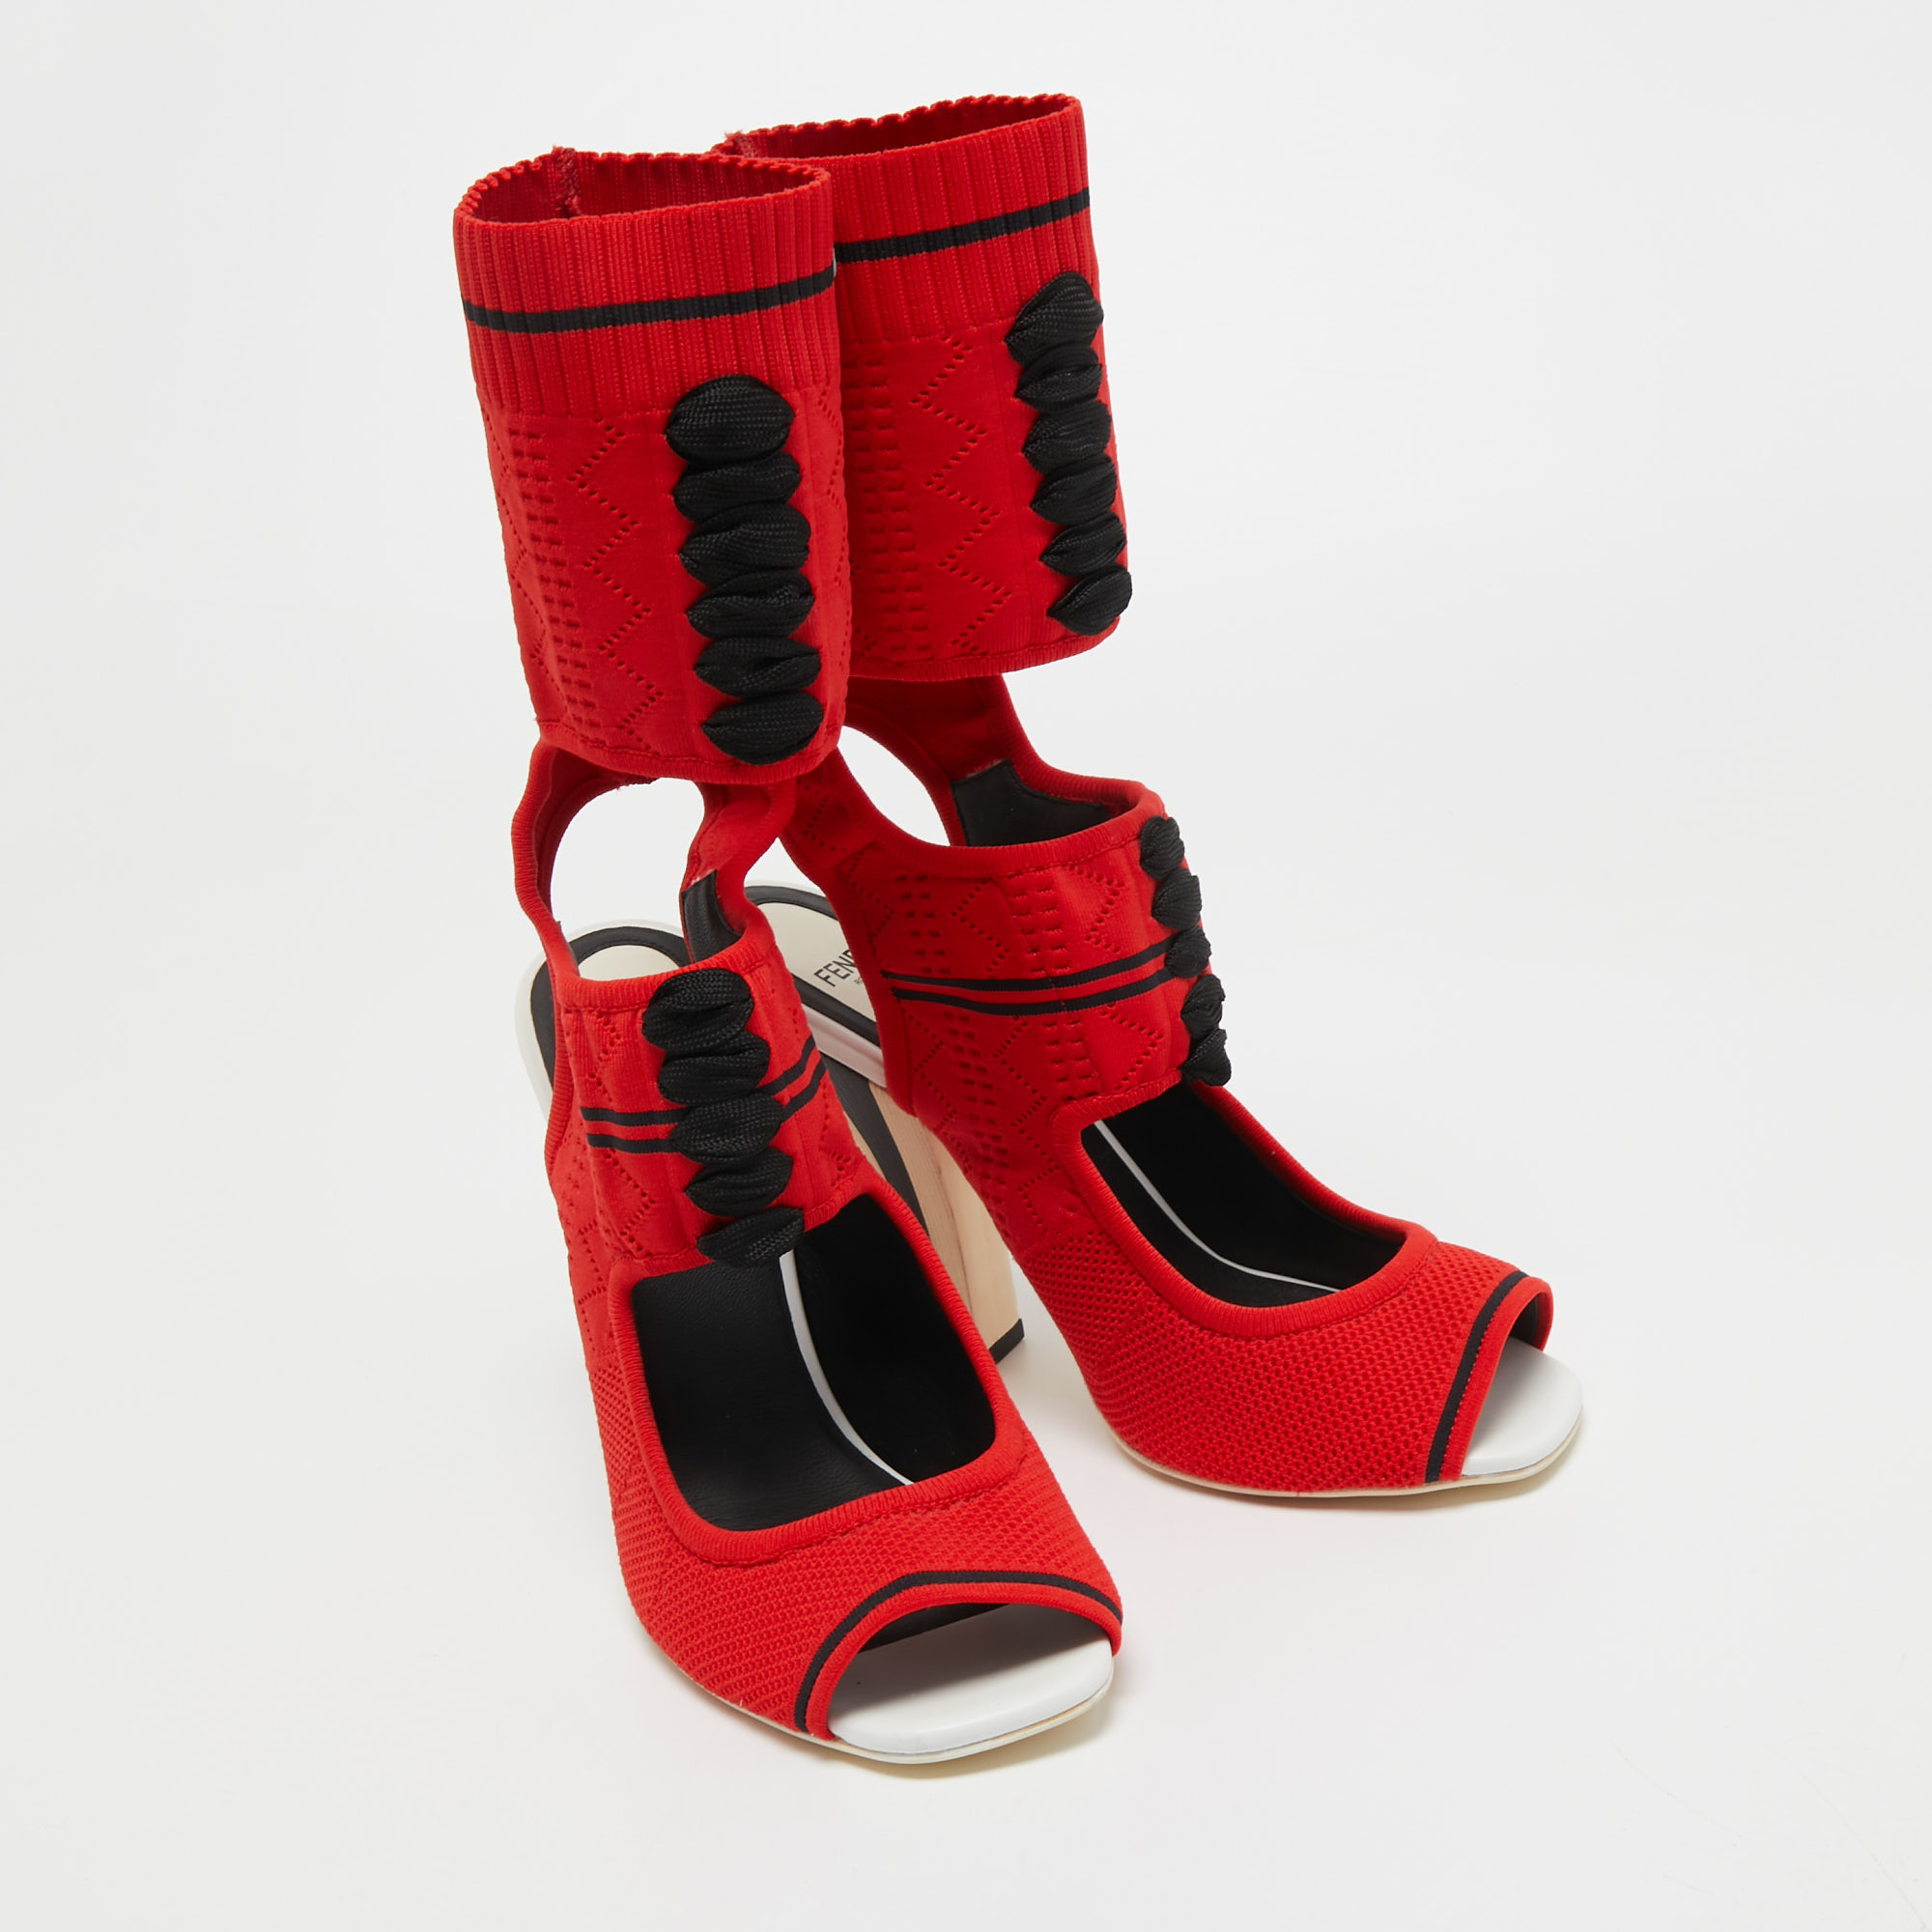 Fendi Red Knit Fabric Peep Toe Cut Out Sandals Size 40